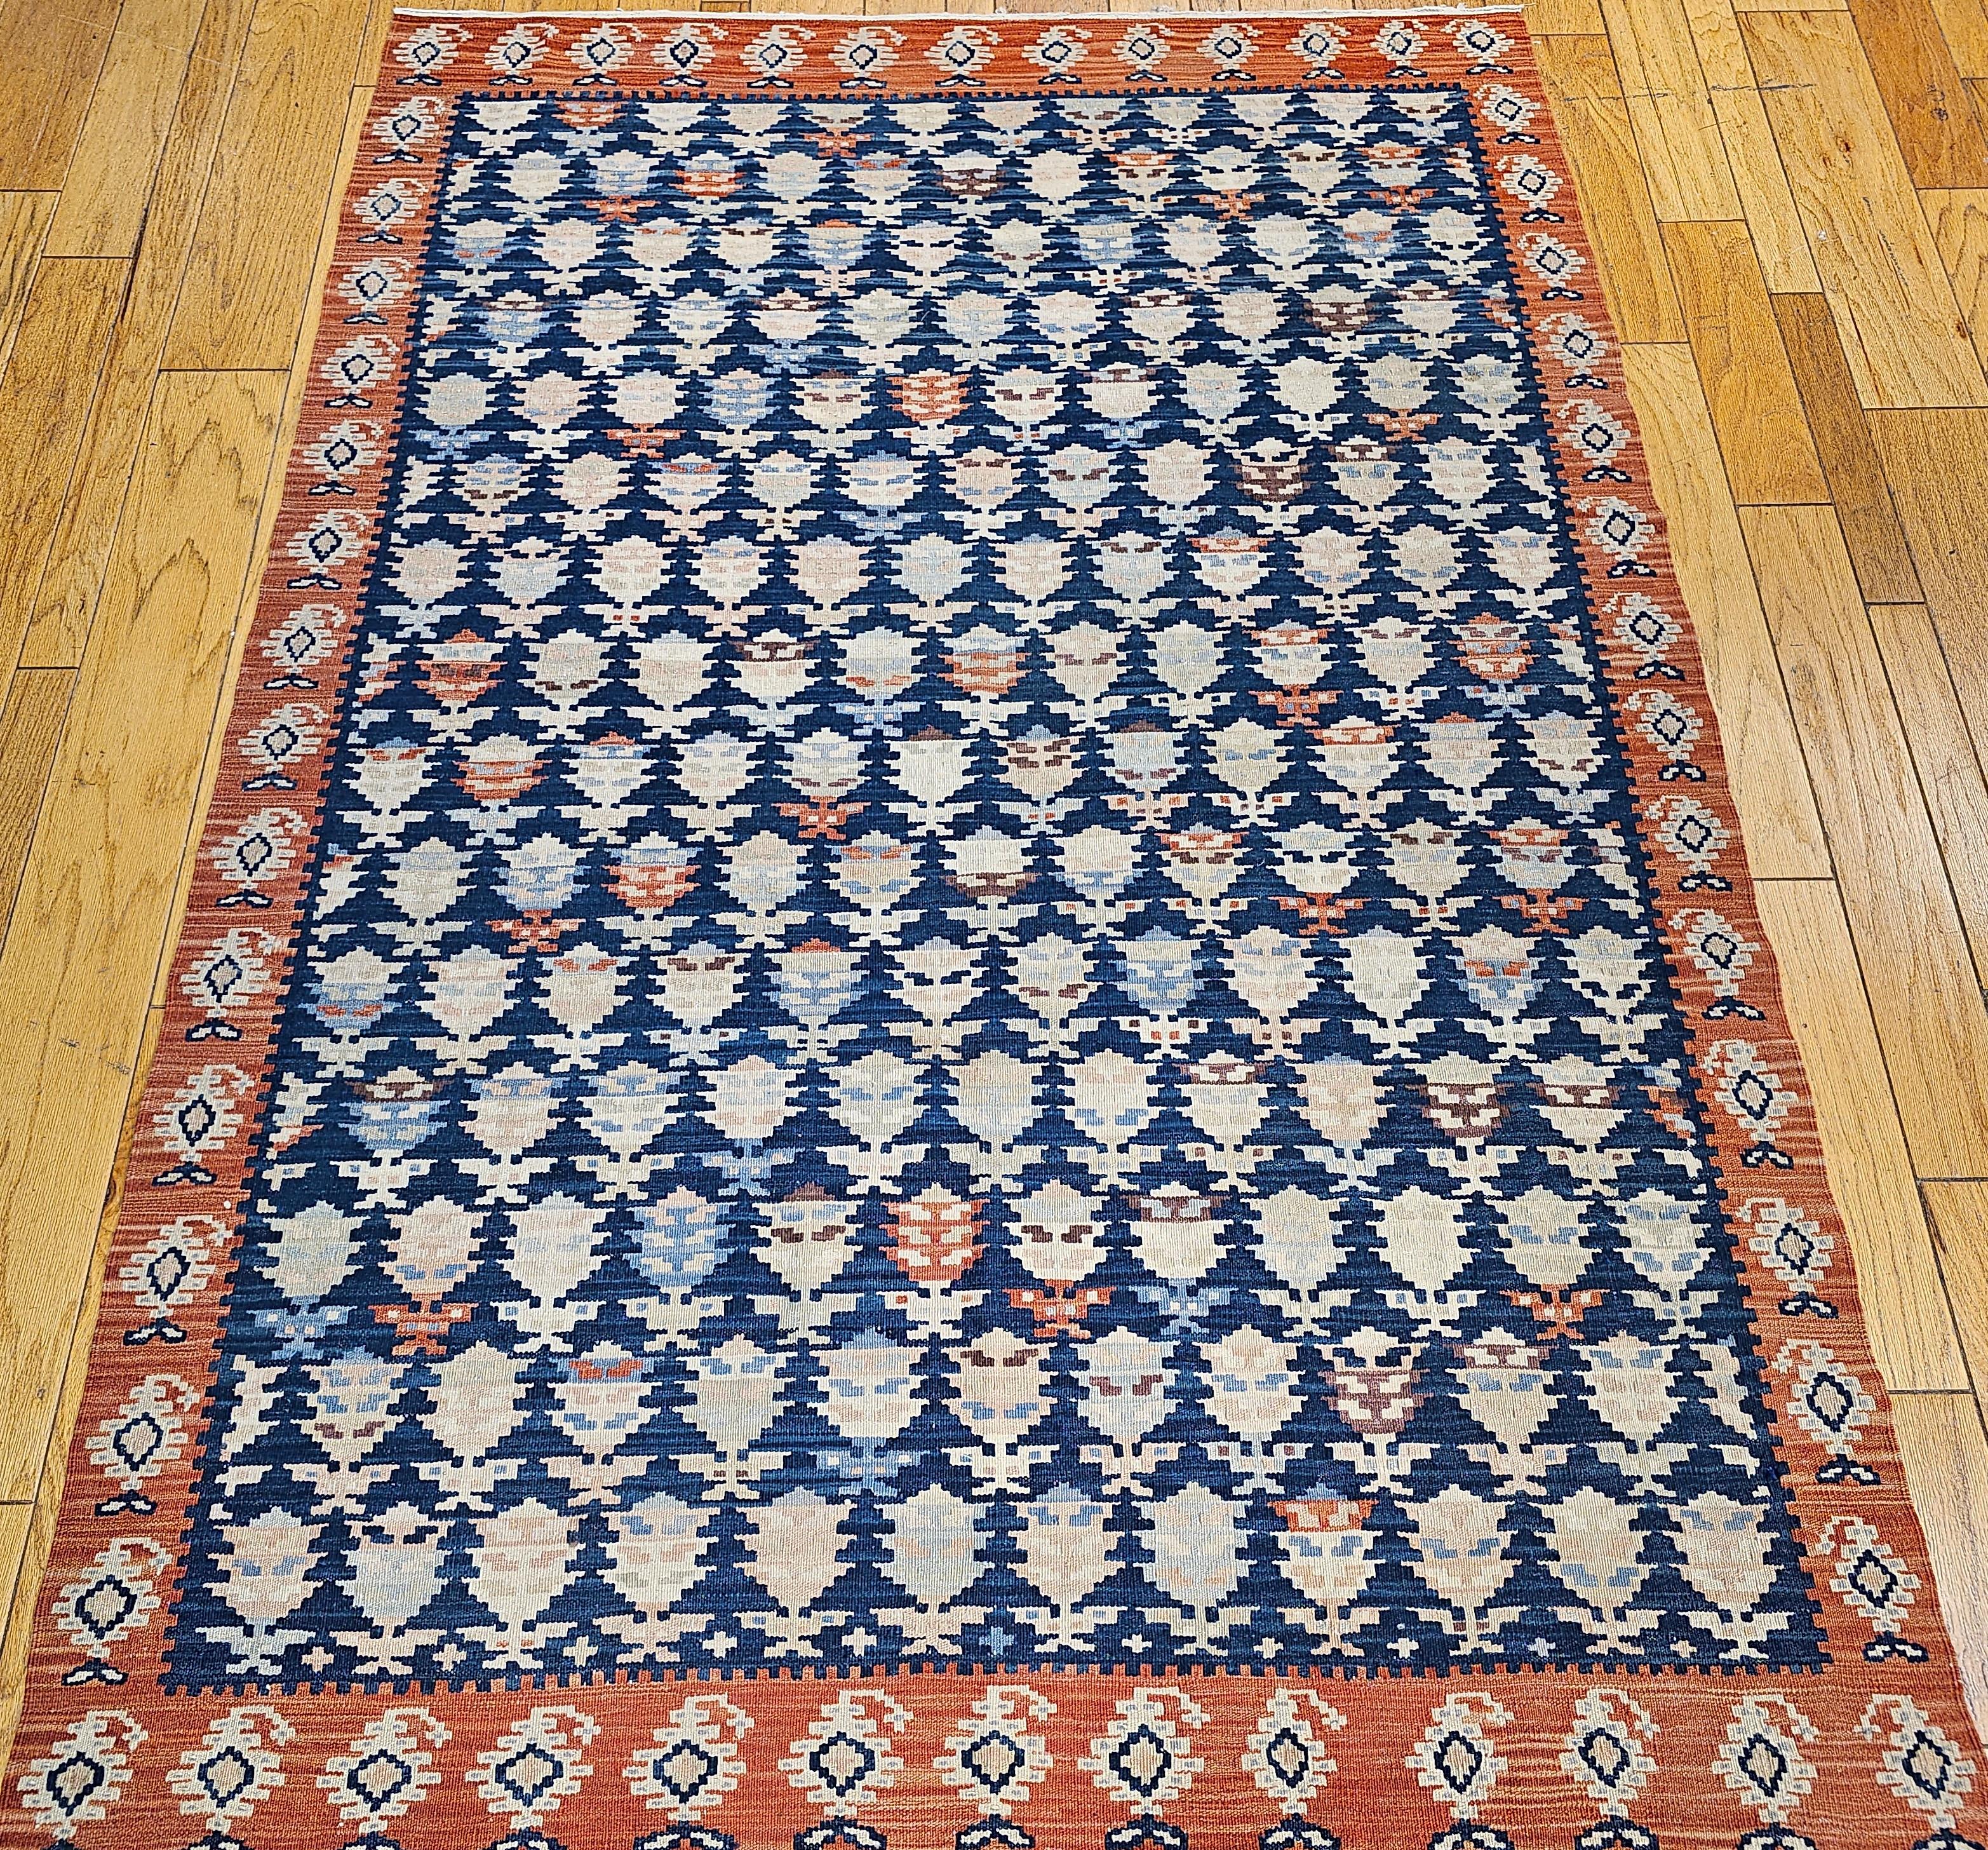 Vintage hand-woven room size Persian Kurdish Kilim in an all-over paisley pattern. The Kurdish kilim has an abrash French blue background with paisley designs in ivory, red, and pink changing directions from one row to another. The border is